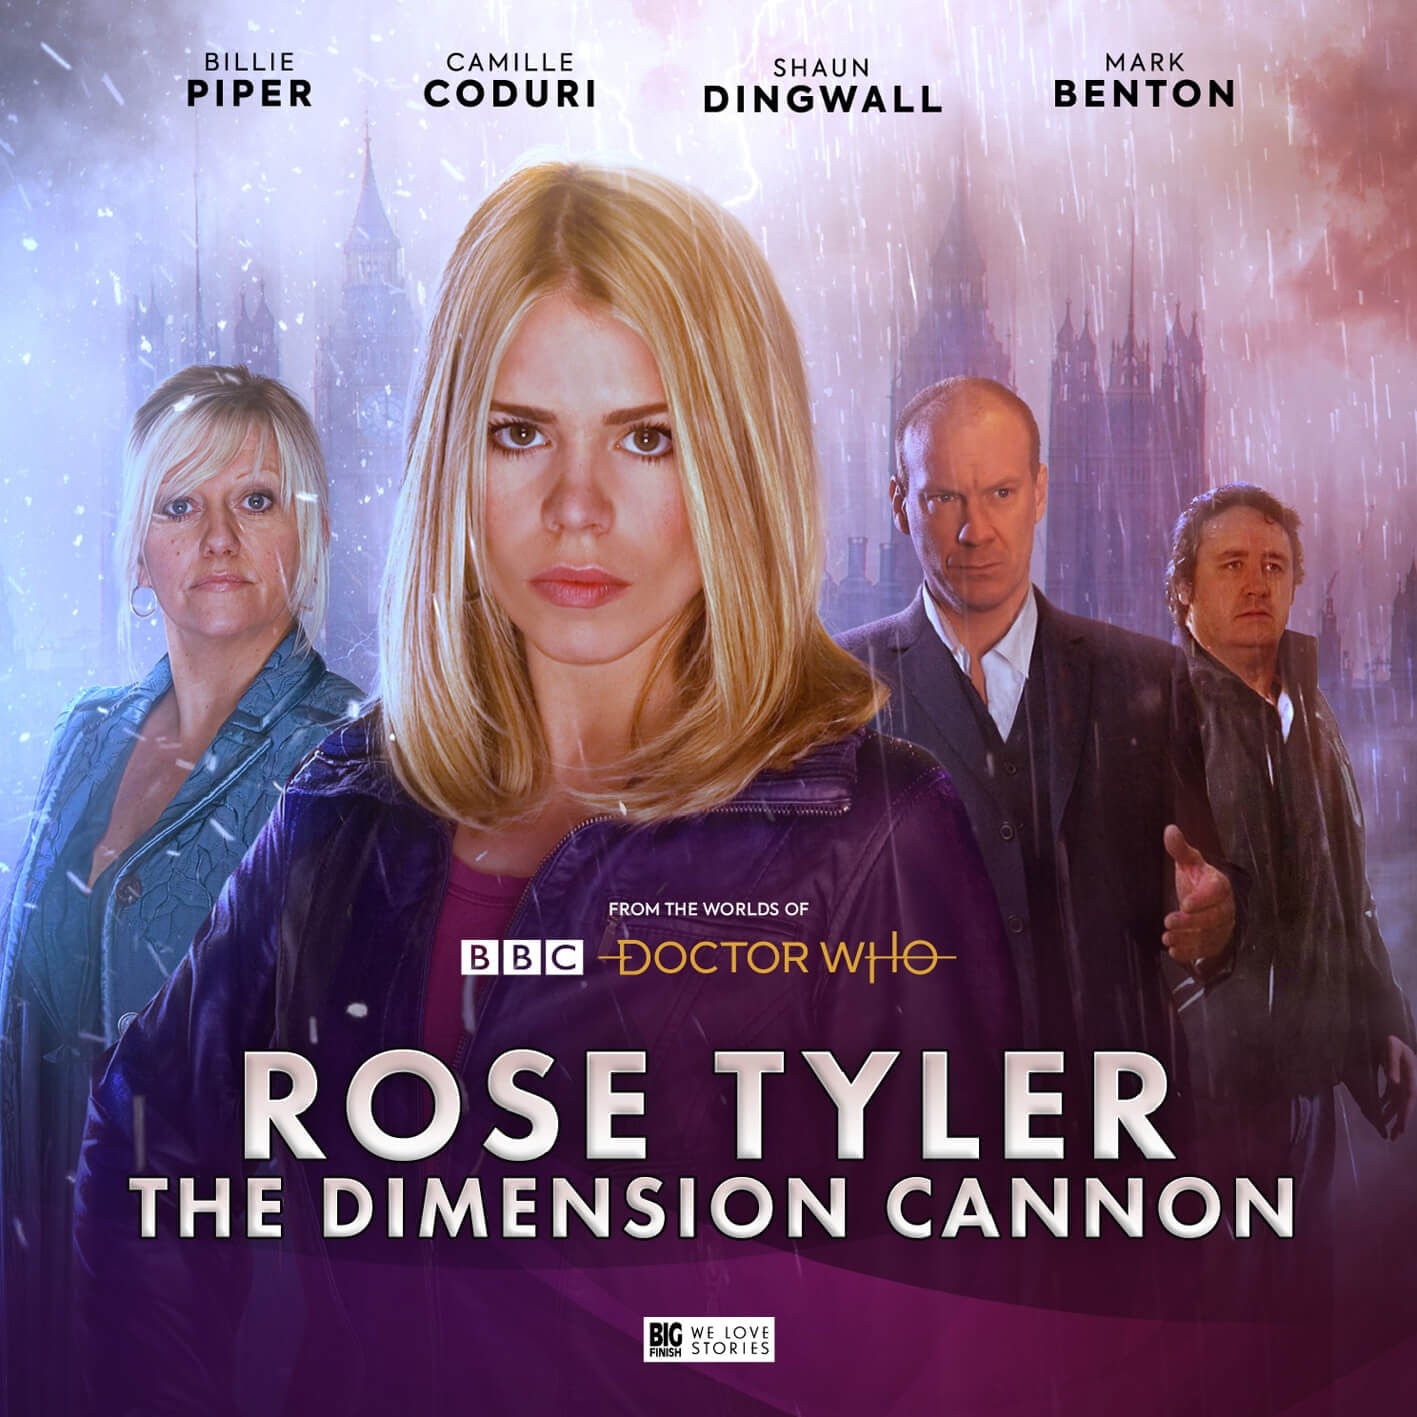 The Doctor Who Companion - The Twelfth Doctor: Volume Three